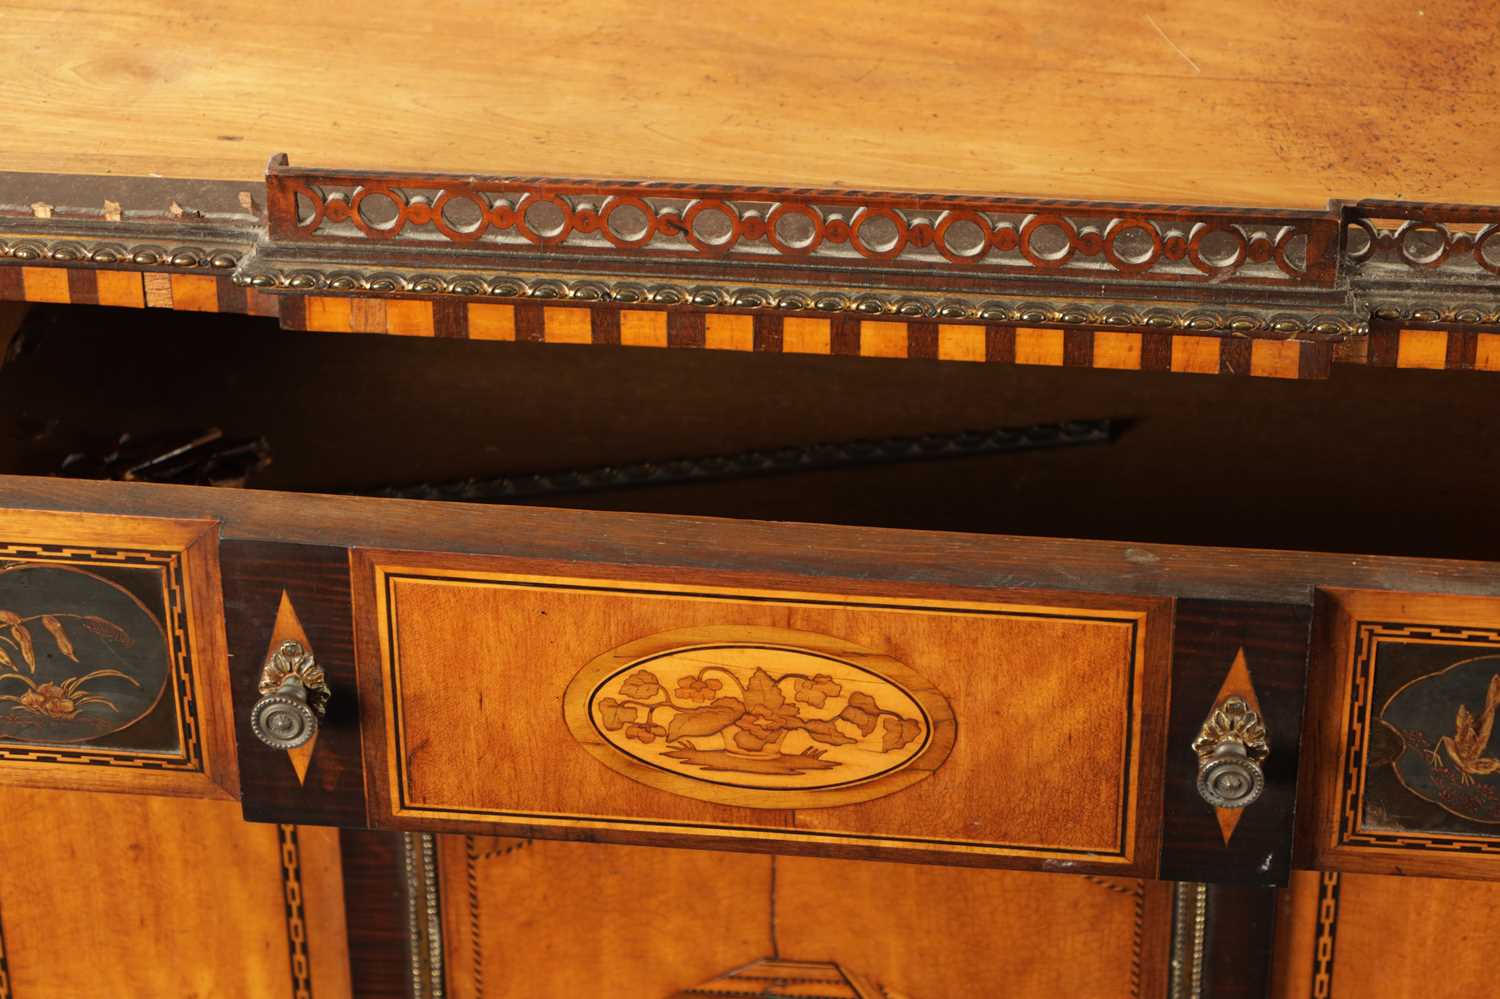 A FINE PAIR OF 18TH CENTURY CONTINENTAL SATINWOOD AND MAHOGANY LACQUERWORK AND INLAID SIDE CABINETS - Image 7 of 15